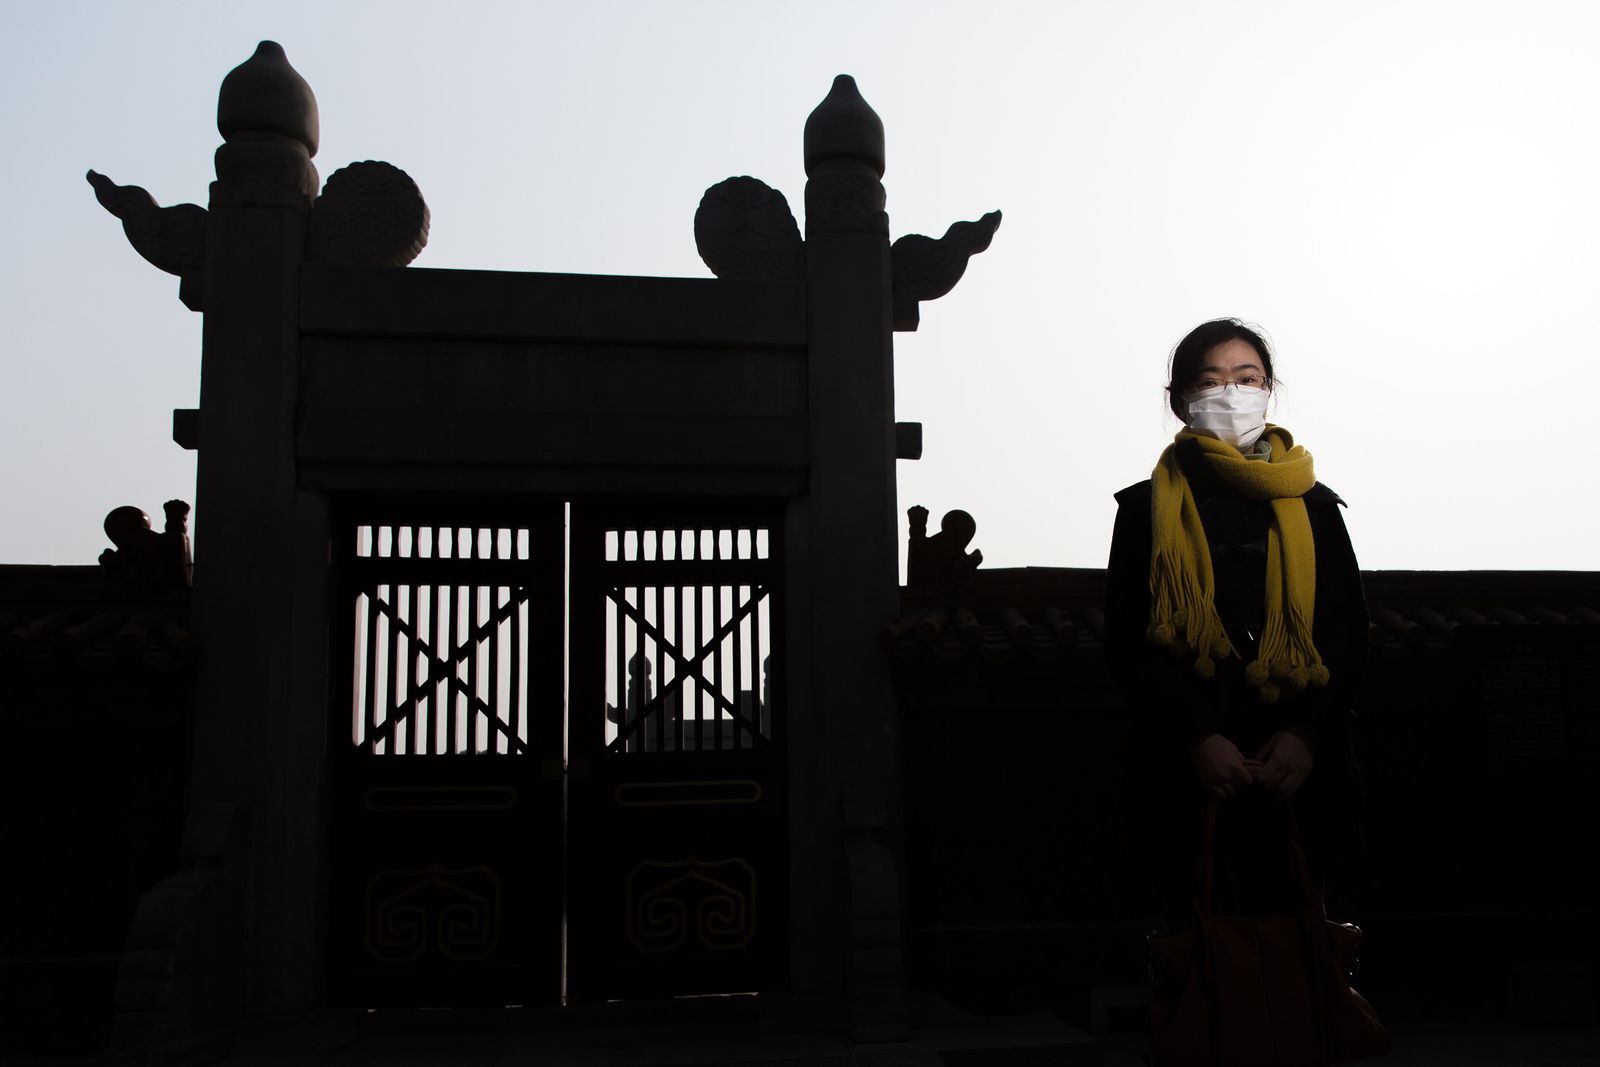 © Sean Gallagher - Image from the Beijing – The Masked City photography project